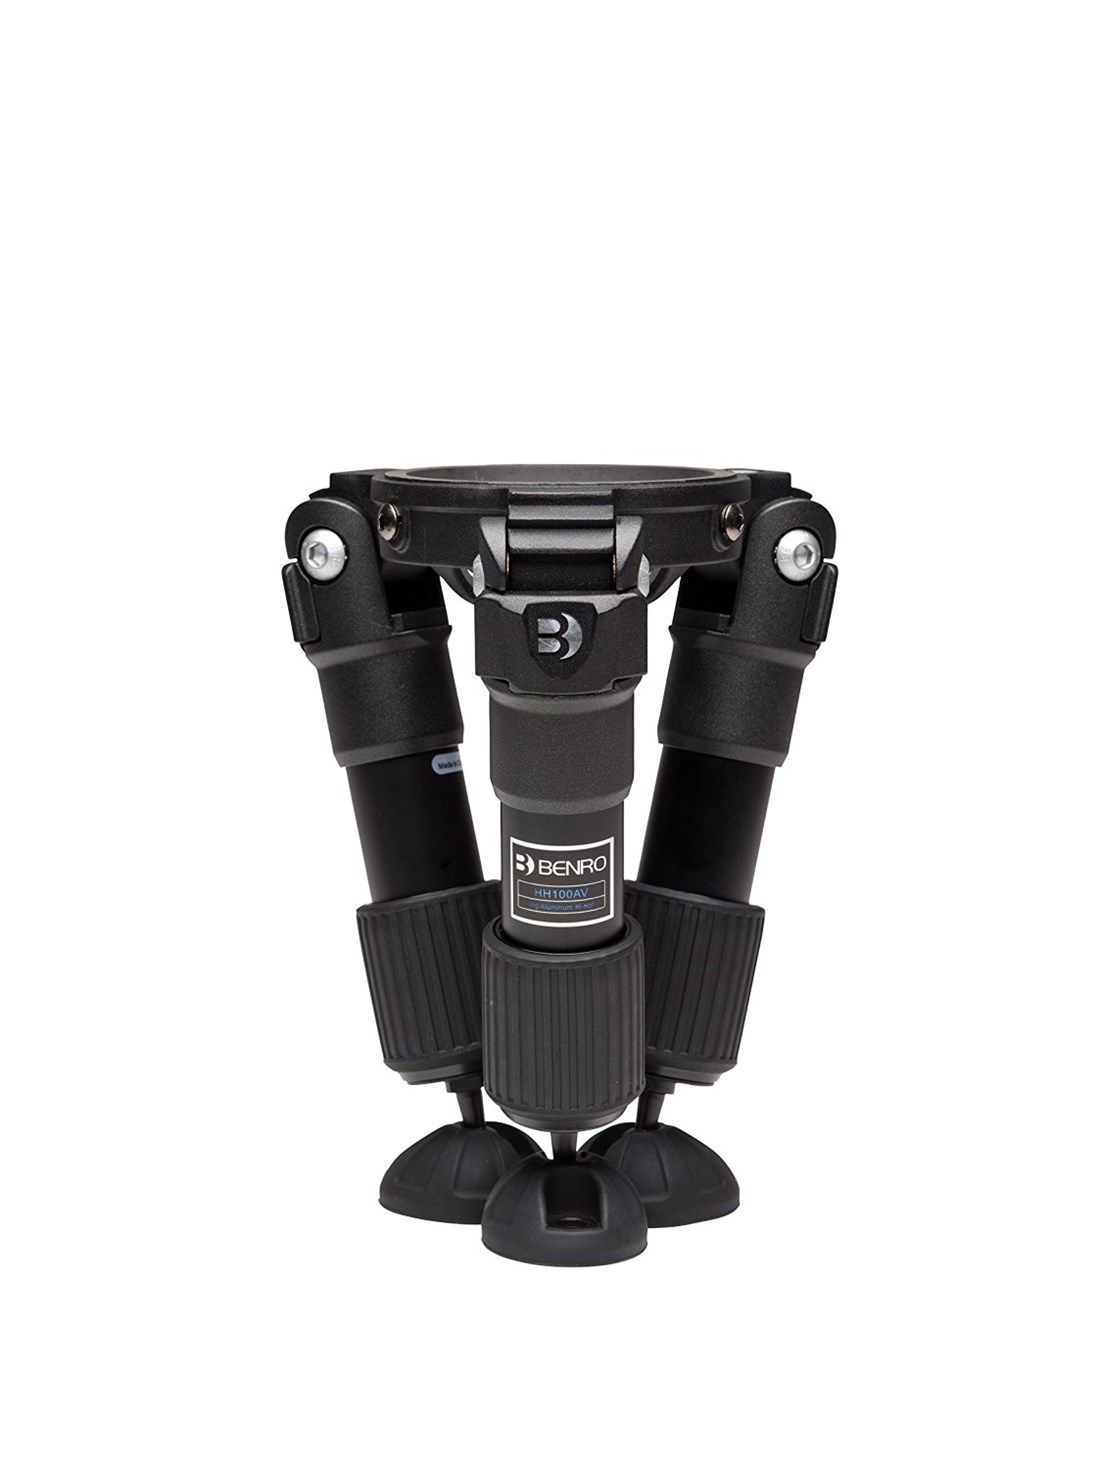 Product Image of Barr & Stroud 8x42 Phase Coated Series 8 Binocular